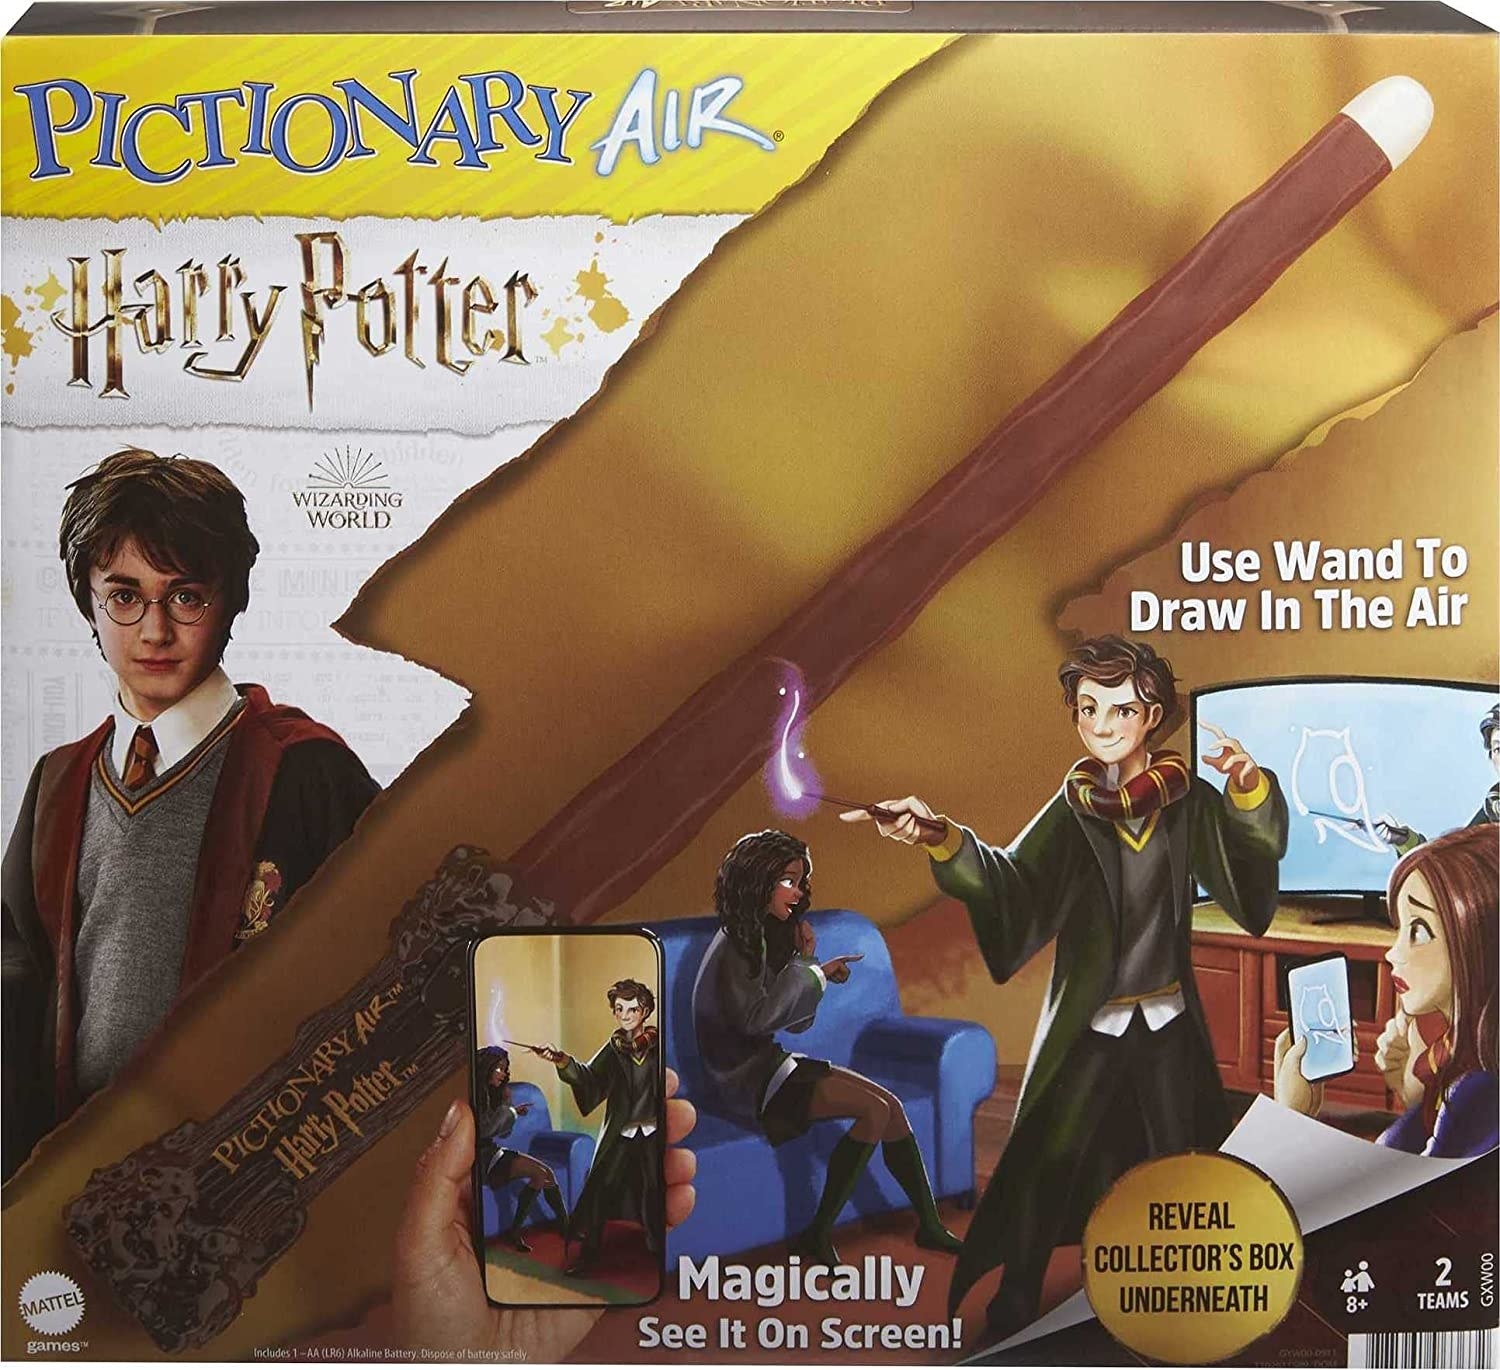 harry potter pictionary air game box